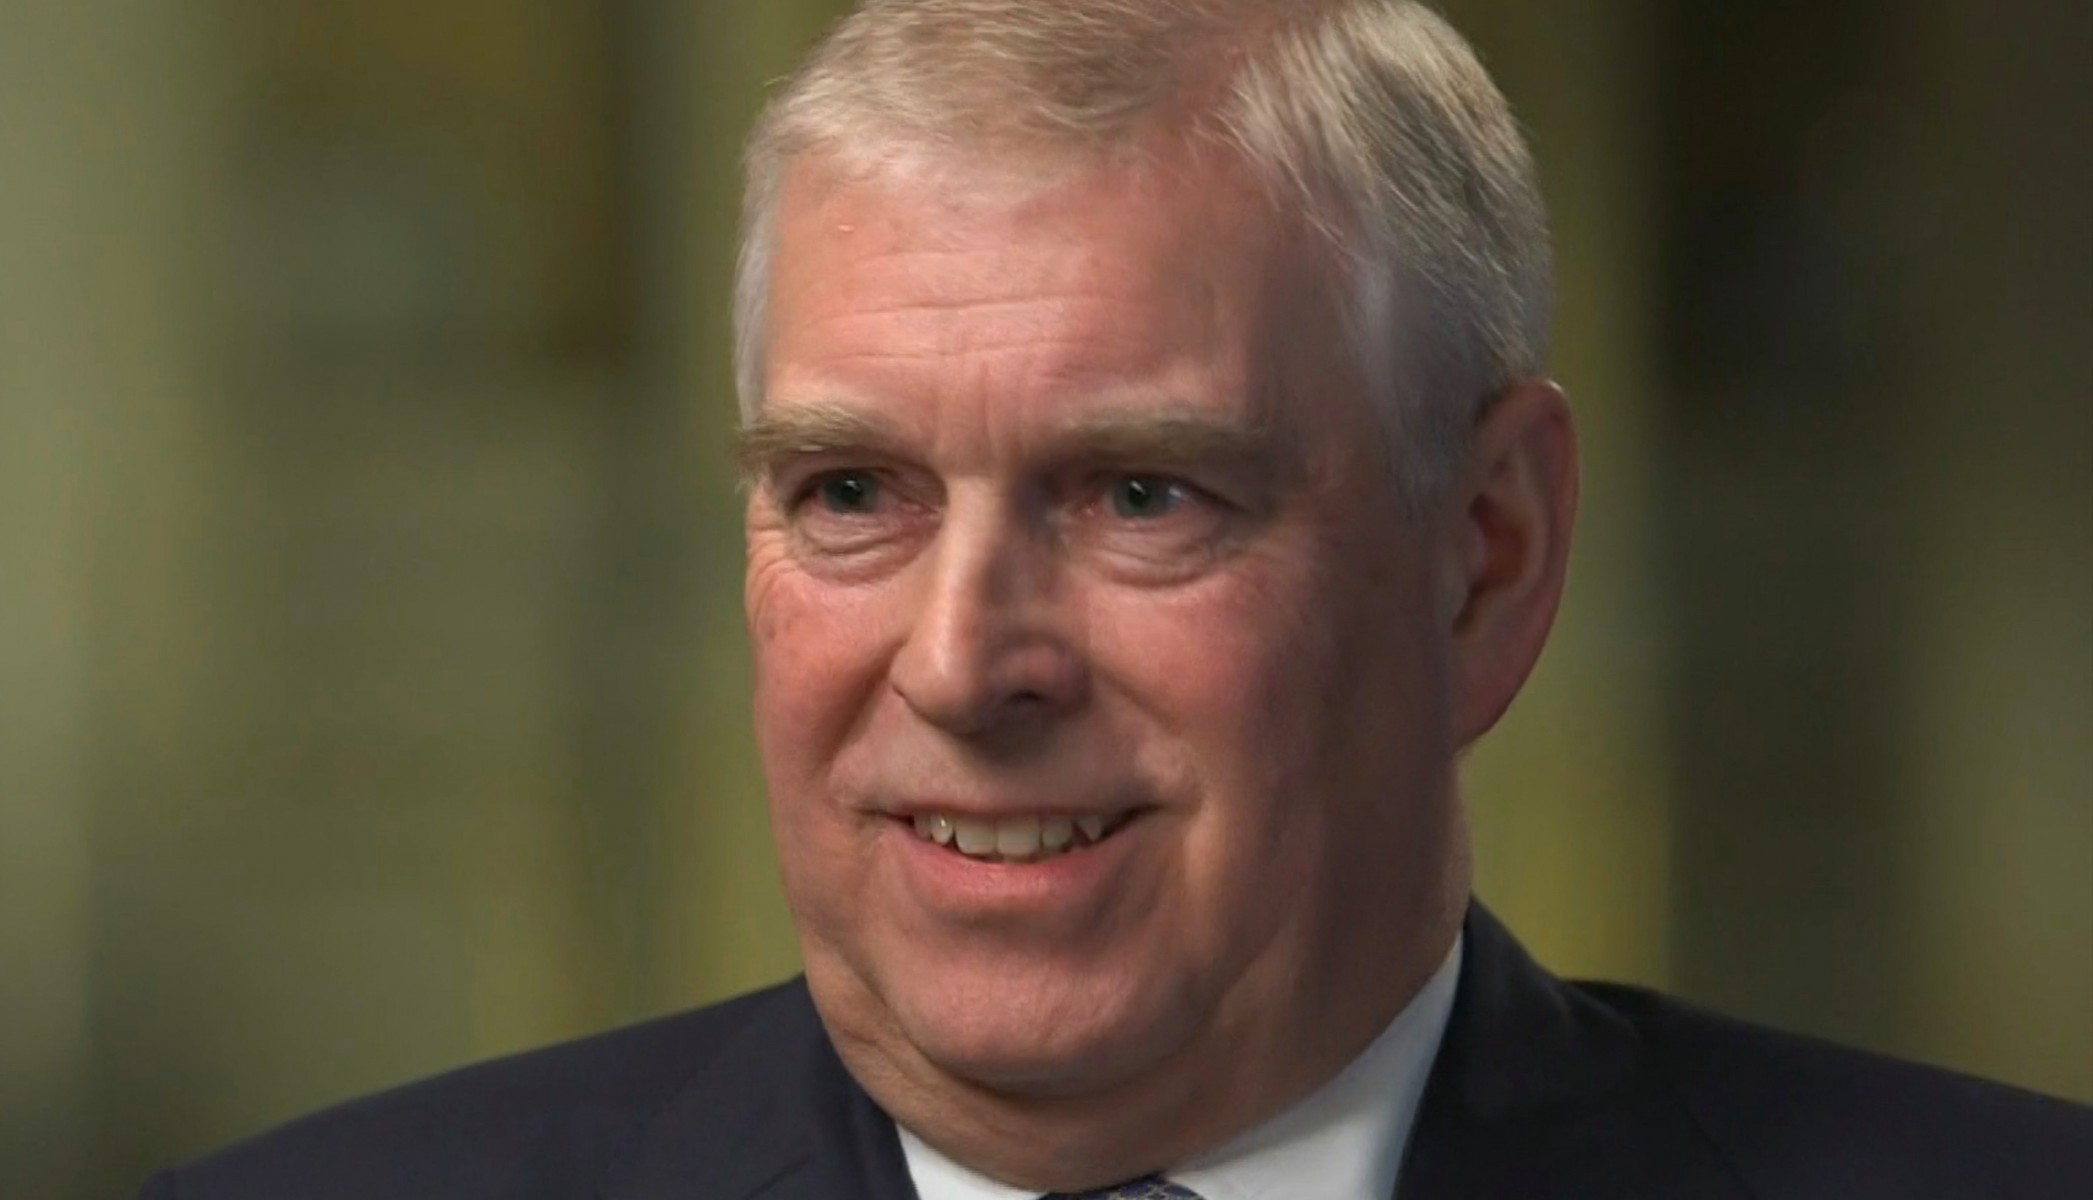 Prince Andrew was slammed by viewers for his 'lack of empathy' in his interview